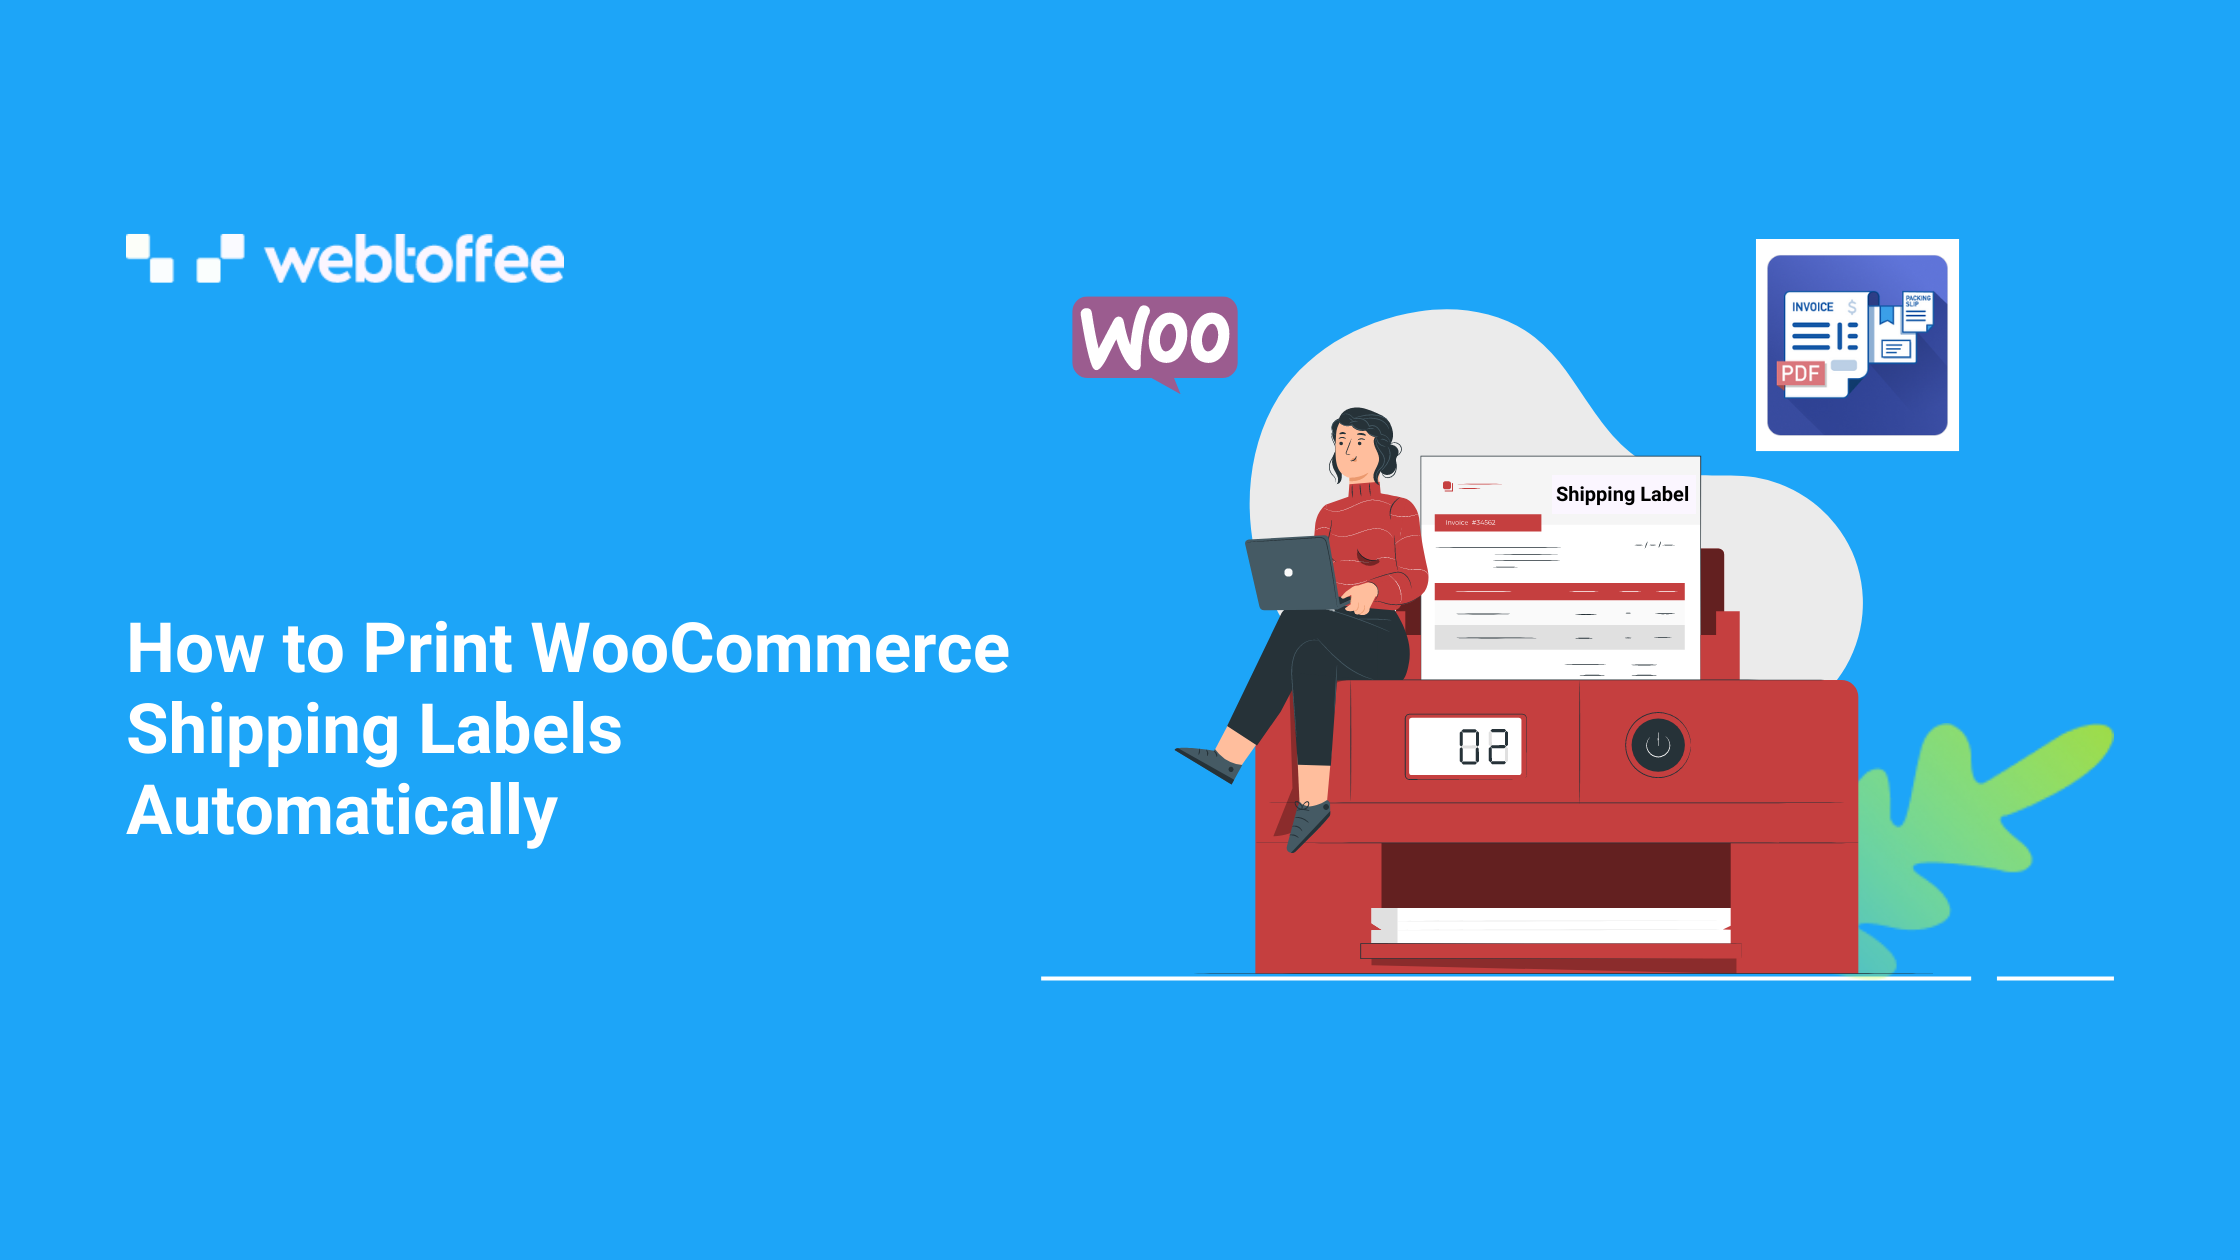 How to print WooCommerce shipping labels automatically (Using add-on)?